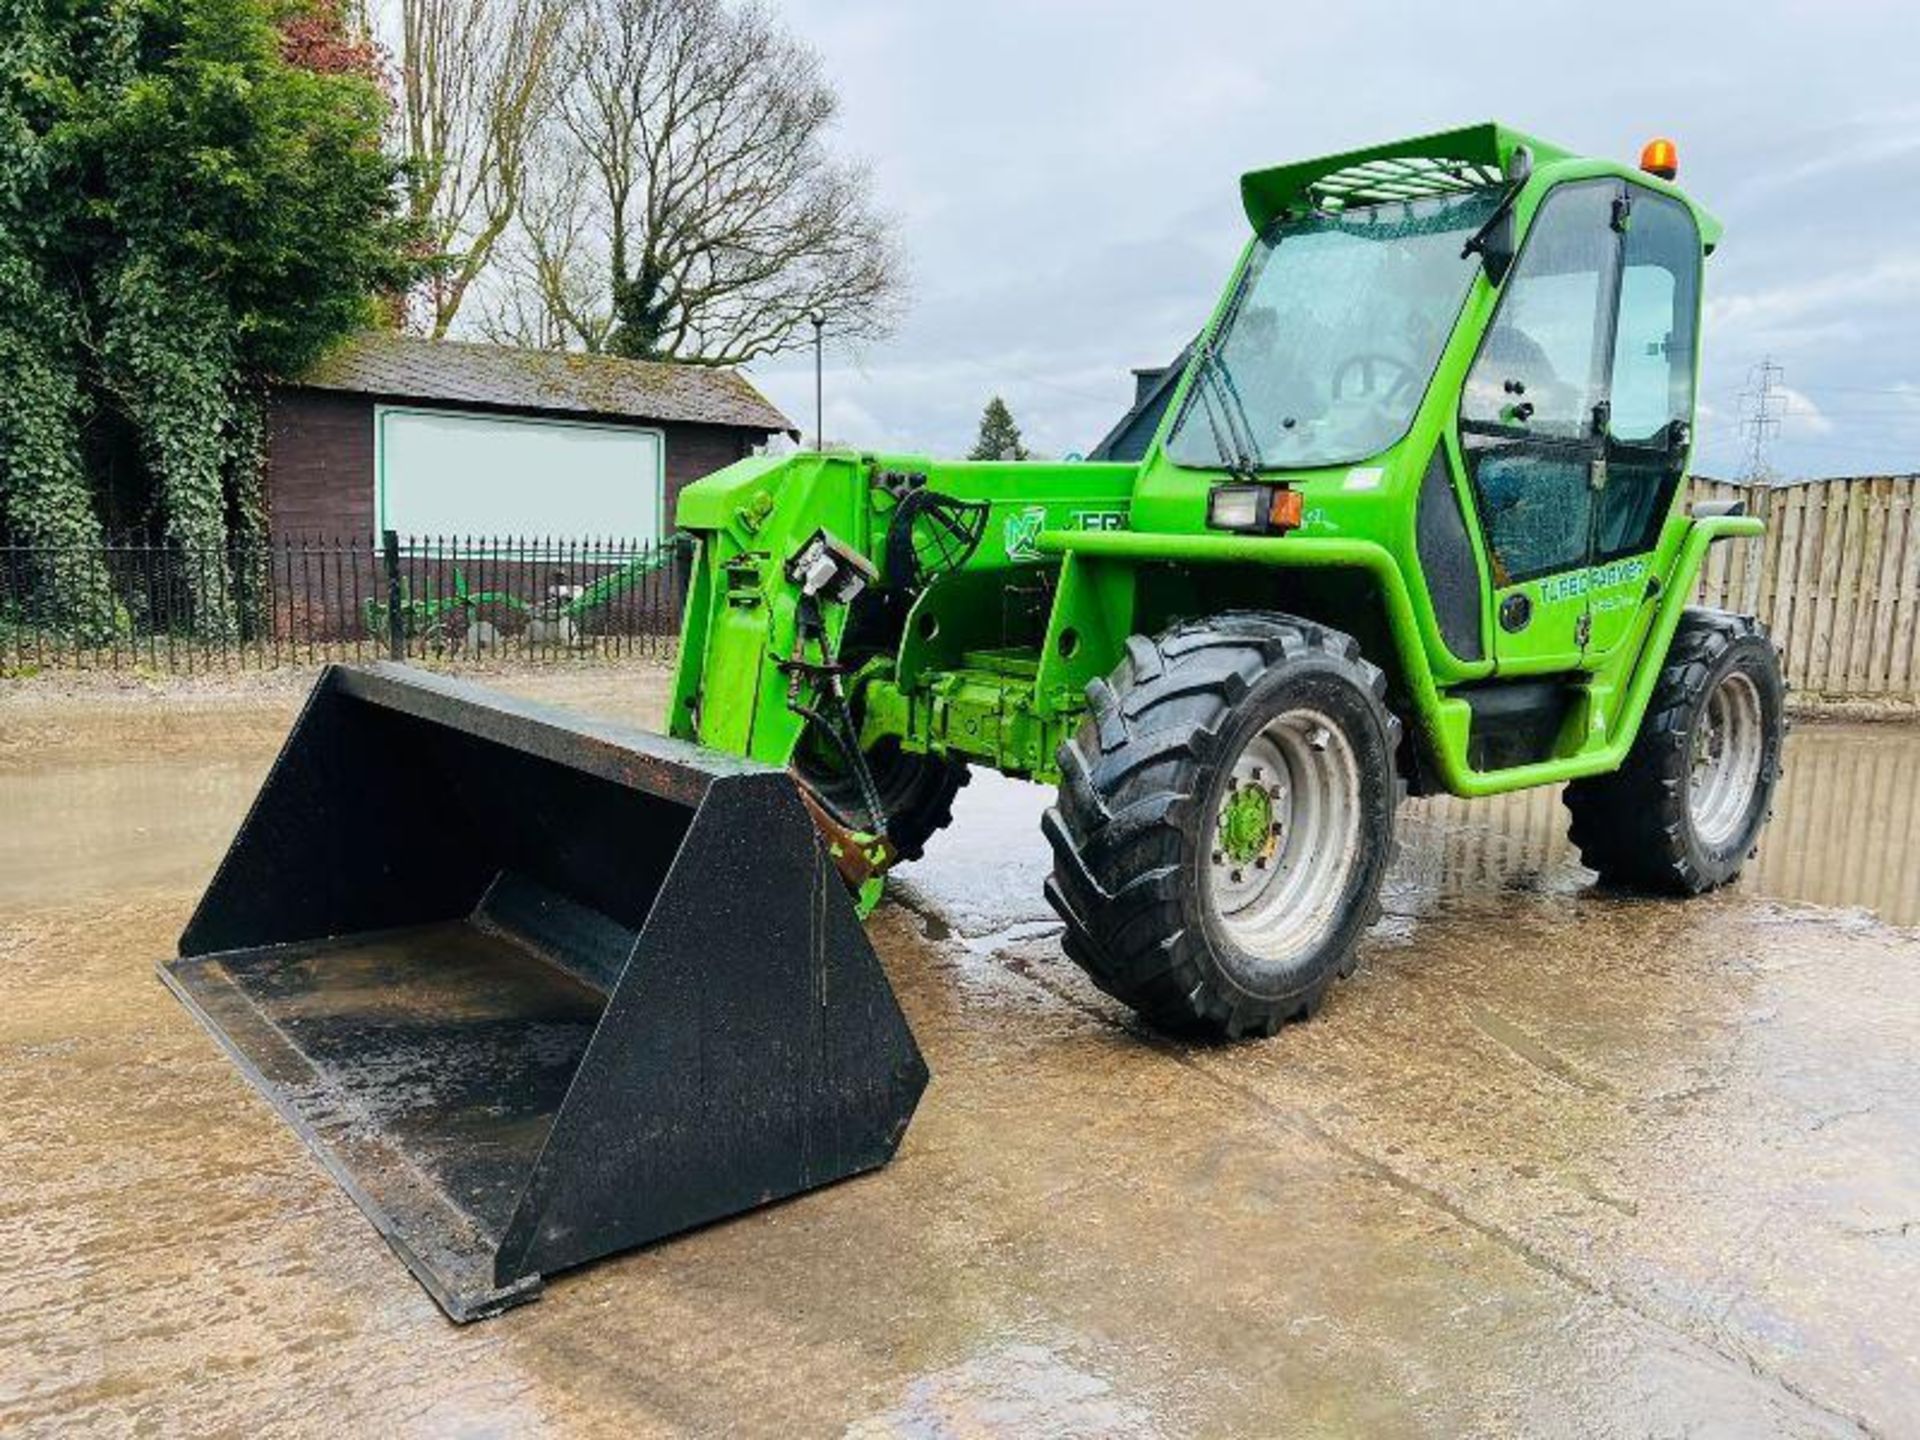 MERLO P34.7 4WD TELEHANDLER*YEAR 2013, AG SPEC* C/W PICK UP HITCH - Image 20 of 20